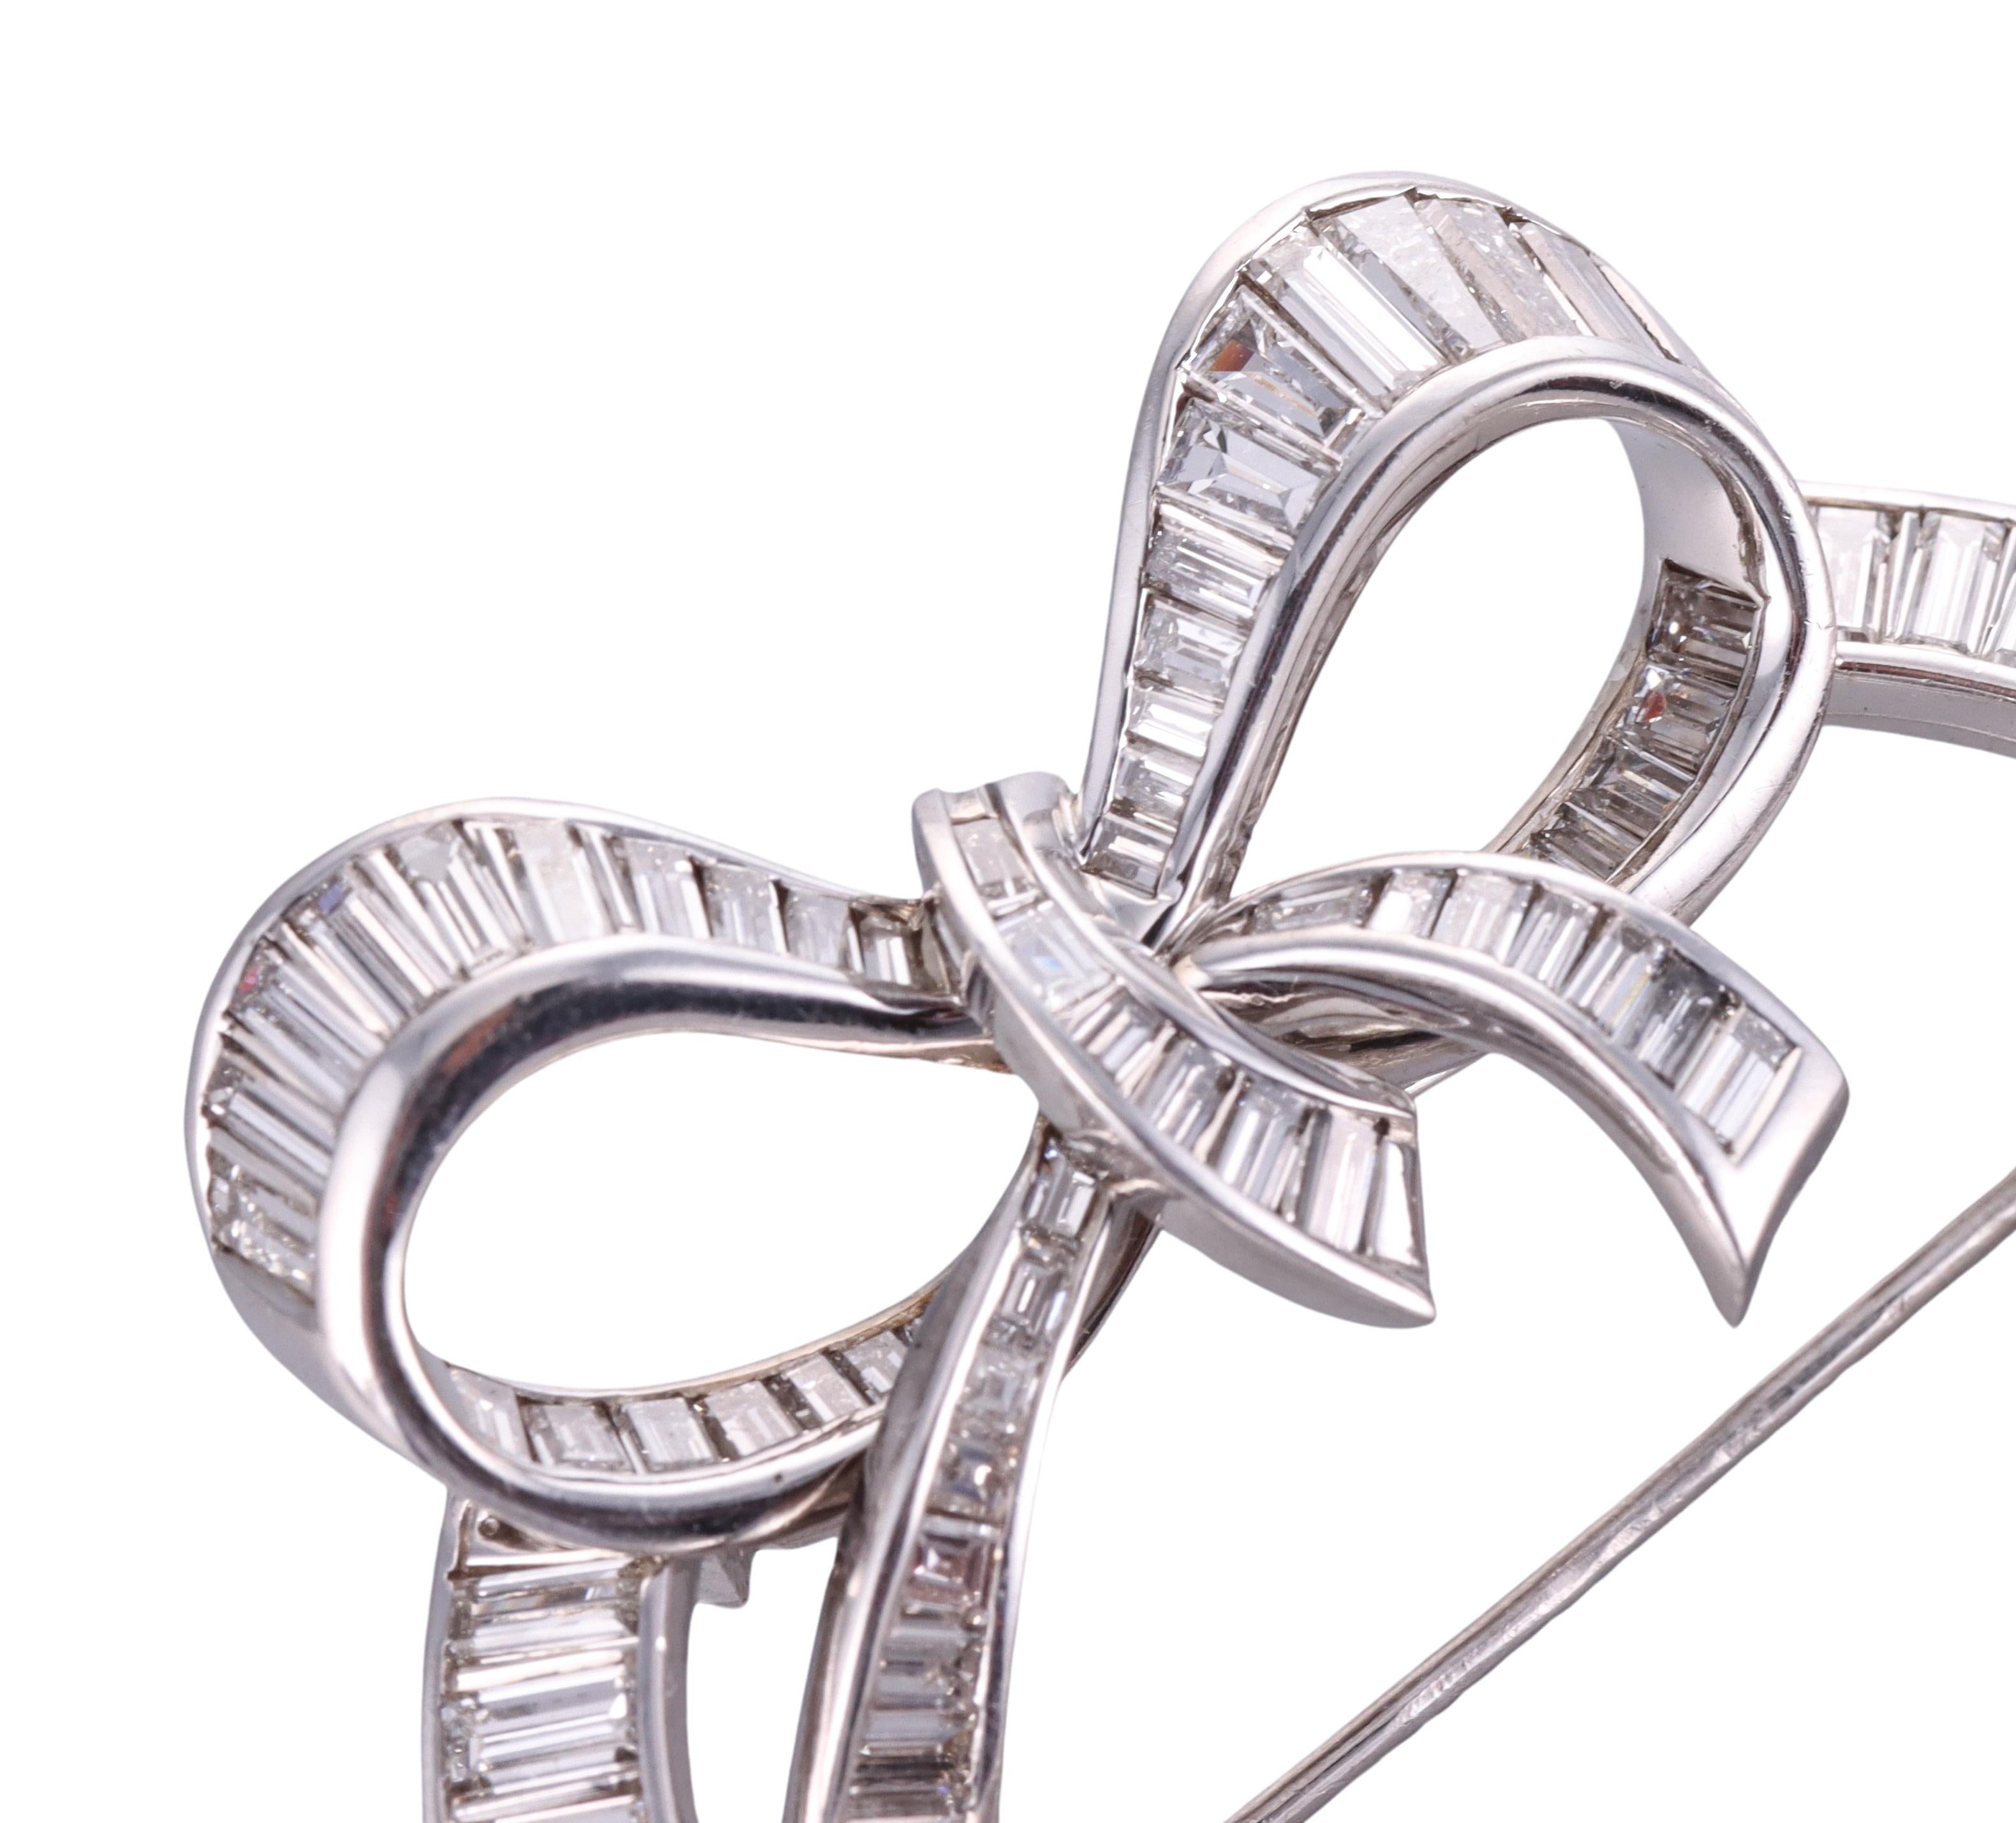 Classic platinum open circa and bow brooch, by Cartier, circa 1950s.  The brooch is set with approximately 5ctw in G/VS baguette diamonds. Measures 1.75